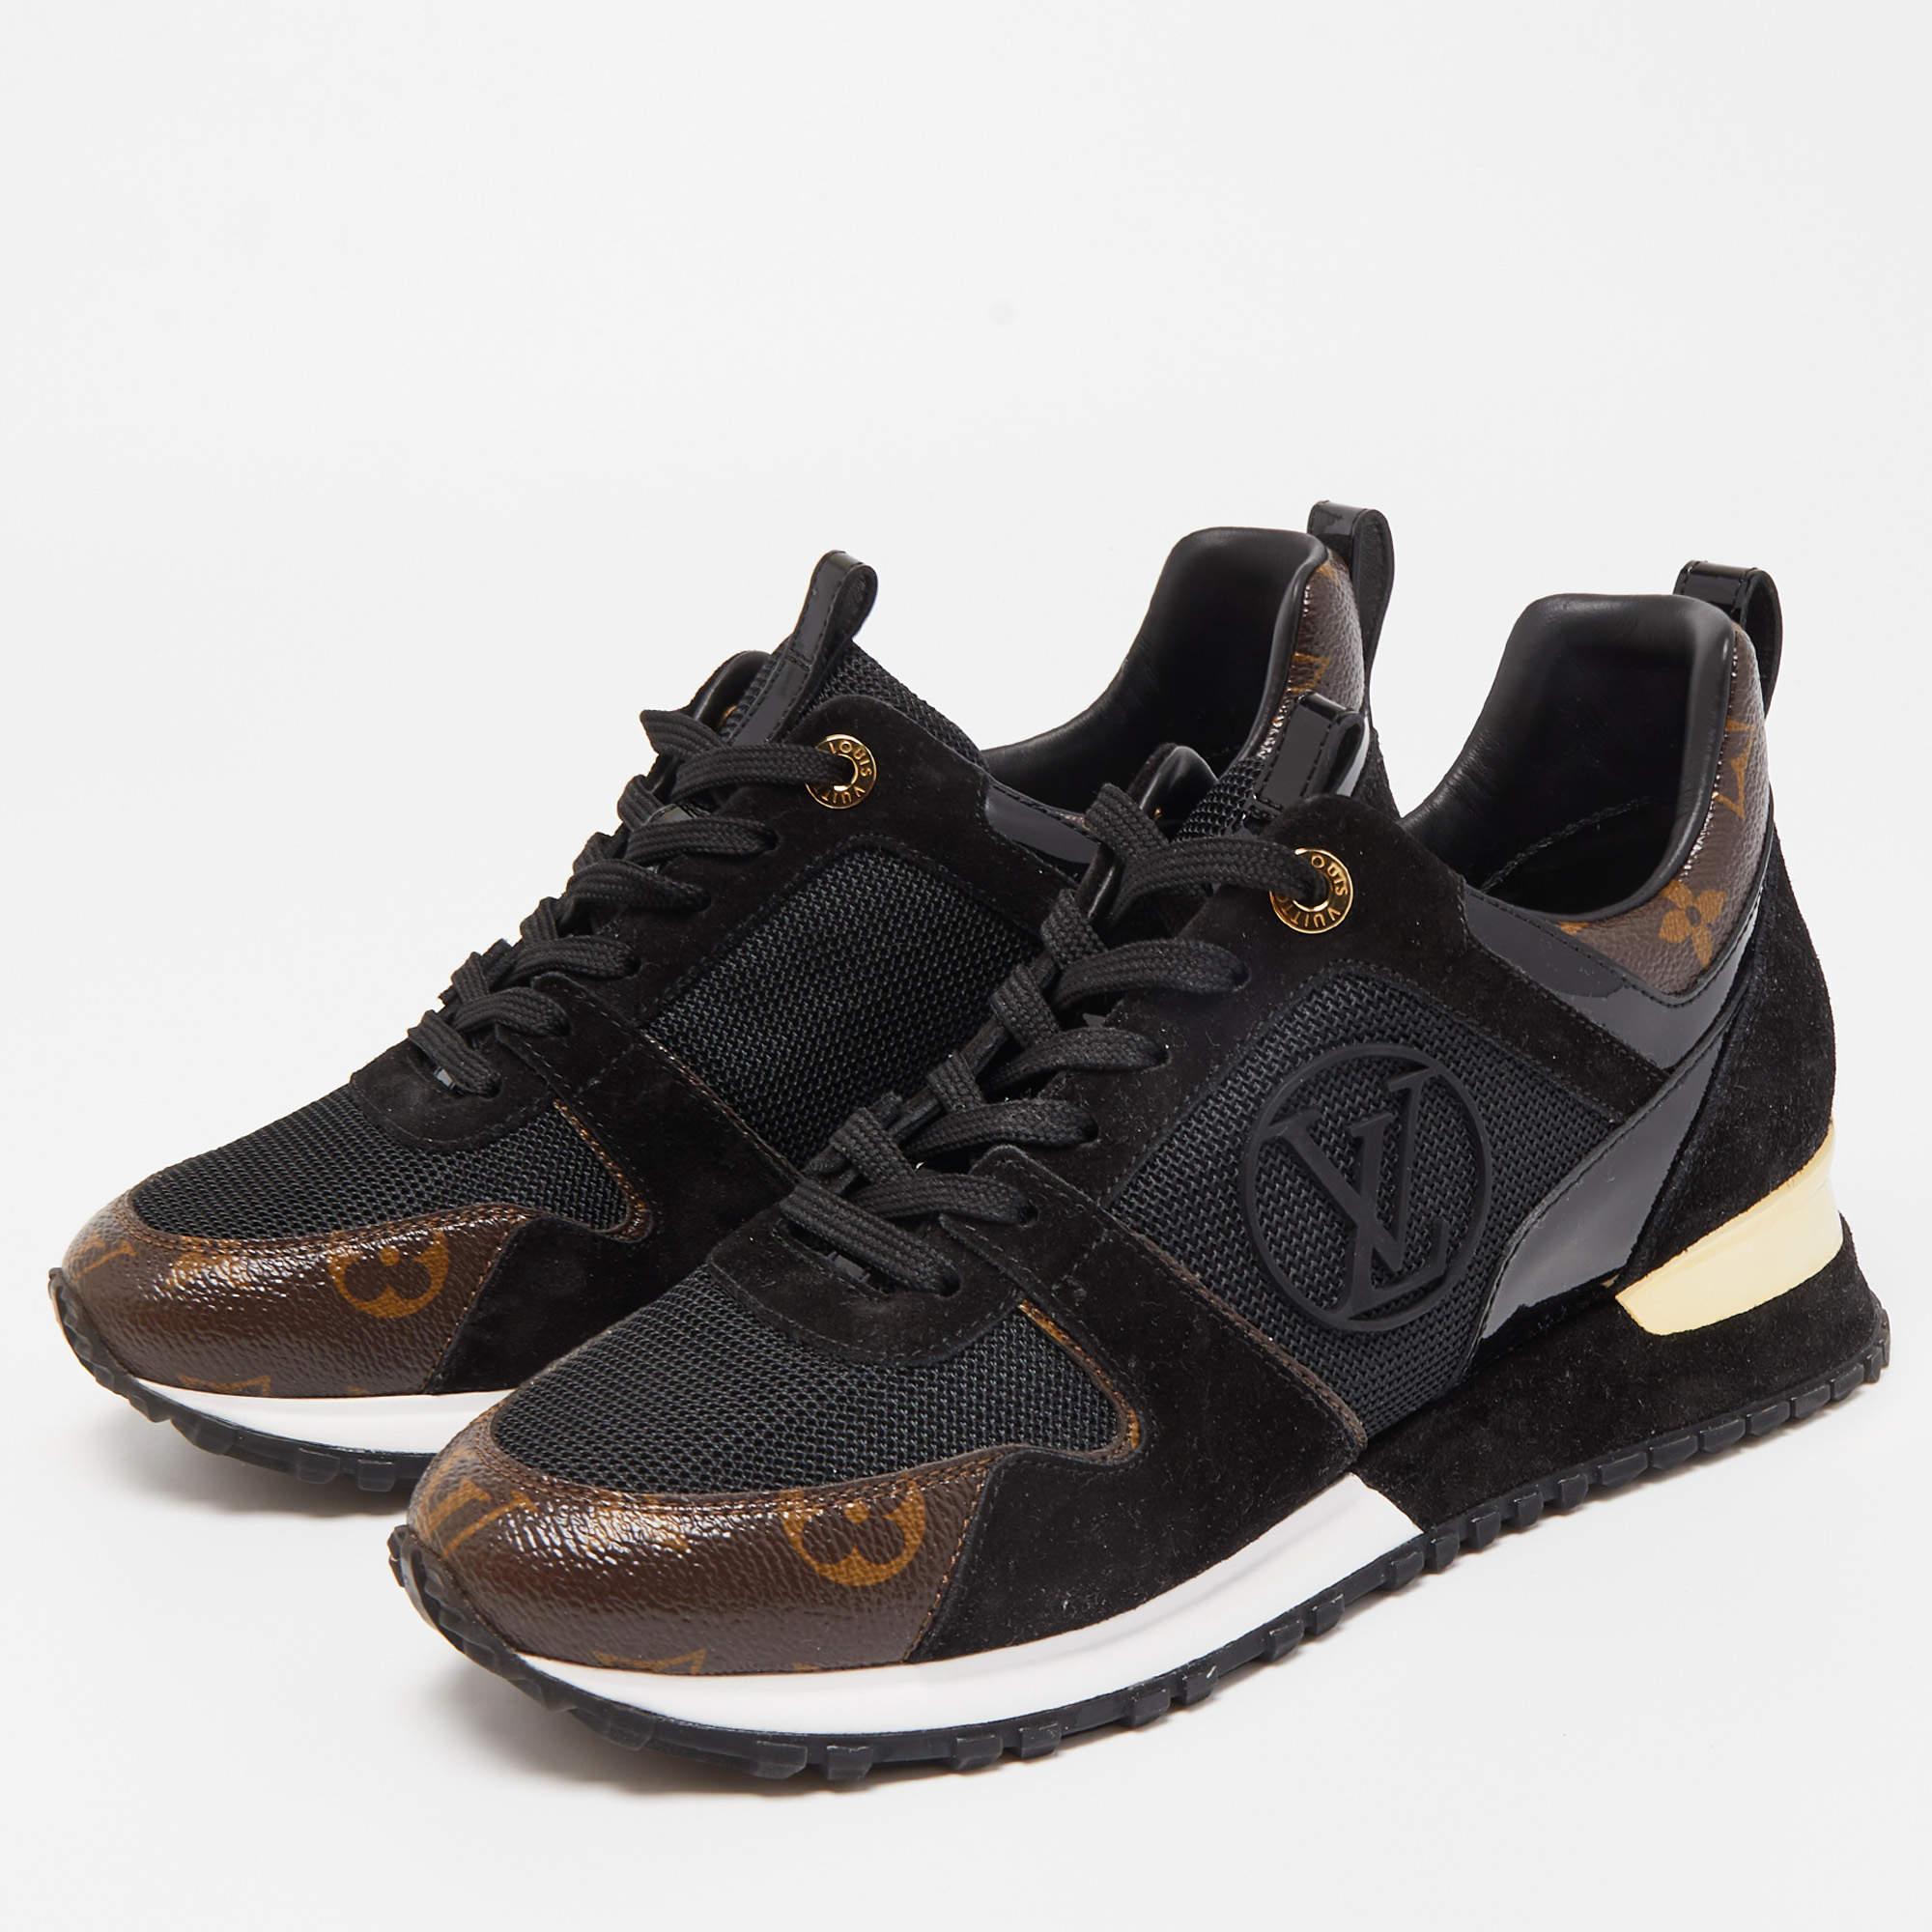 The Louis Vuitton Run Away sneakers are a luxurious blend of fashion and function. These high-end sneakers feature the iconic LV monogram canvas combined with premium black leather accents. With a sleek and modern design, they offer comfort and